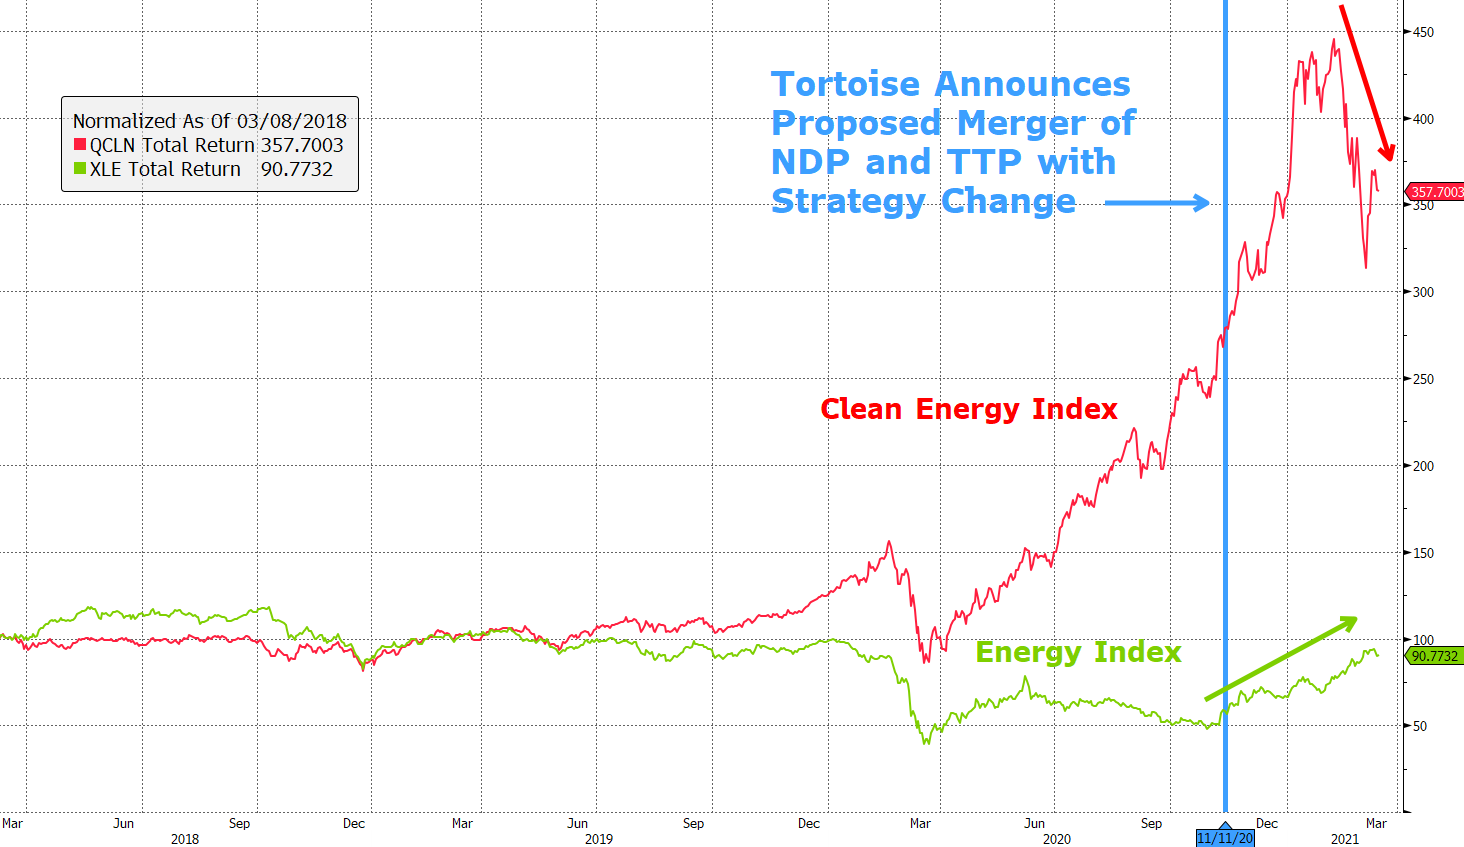 NDP’s Board Has Proposed Chasing the Performance of a Clean Energy Bubble